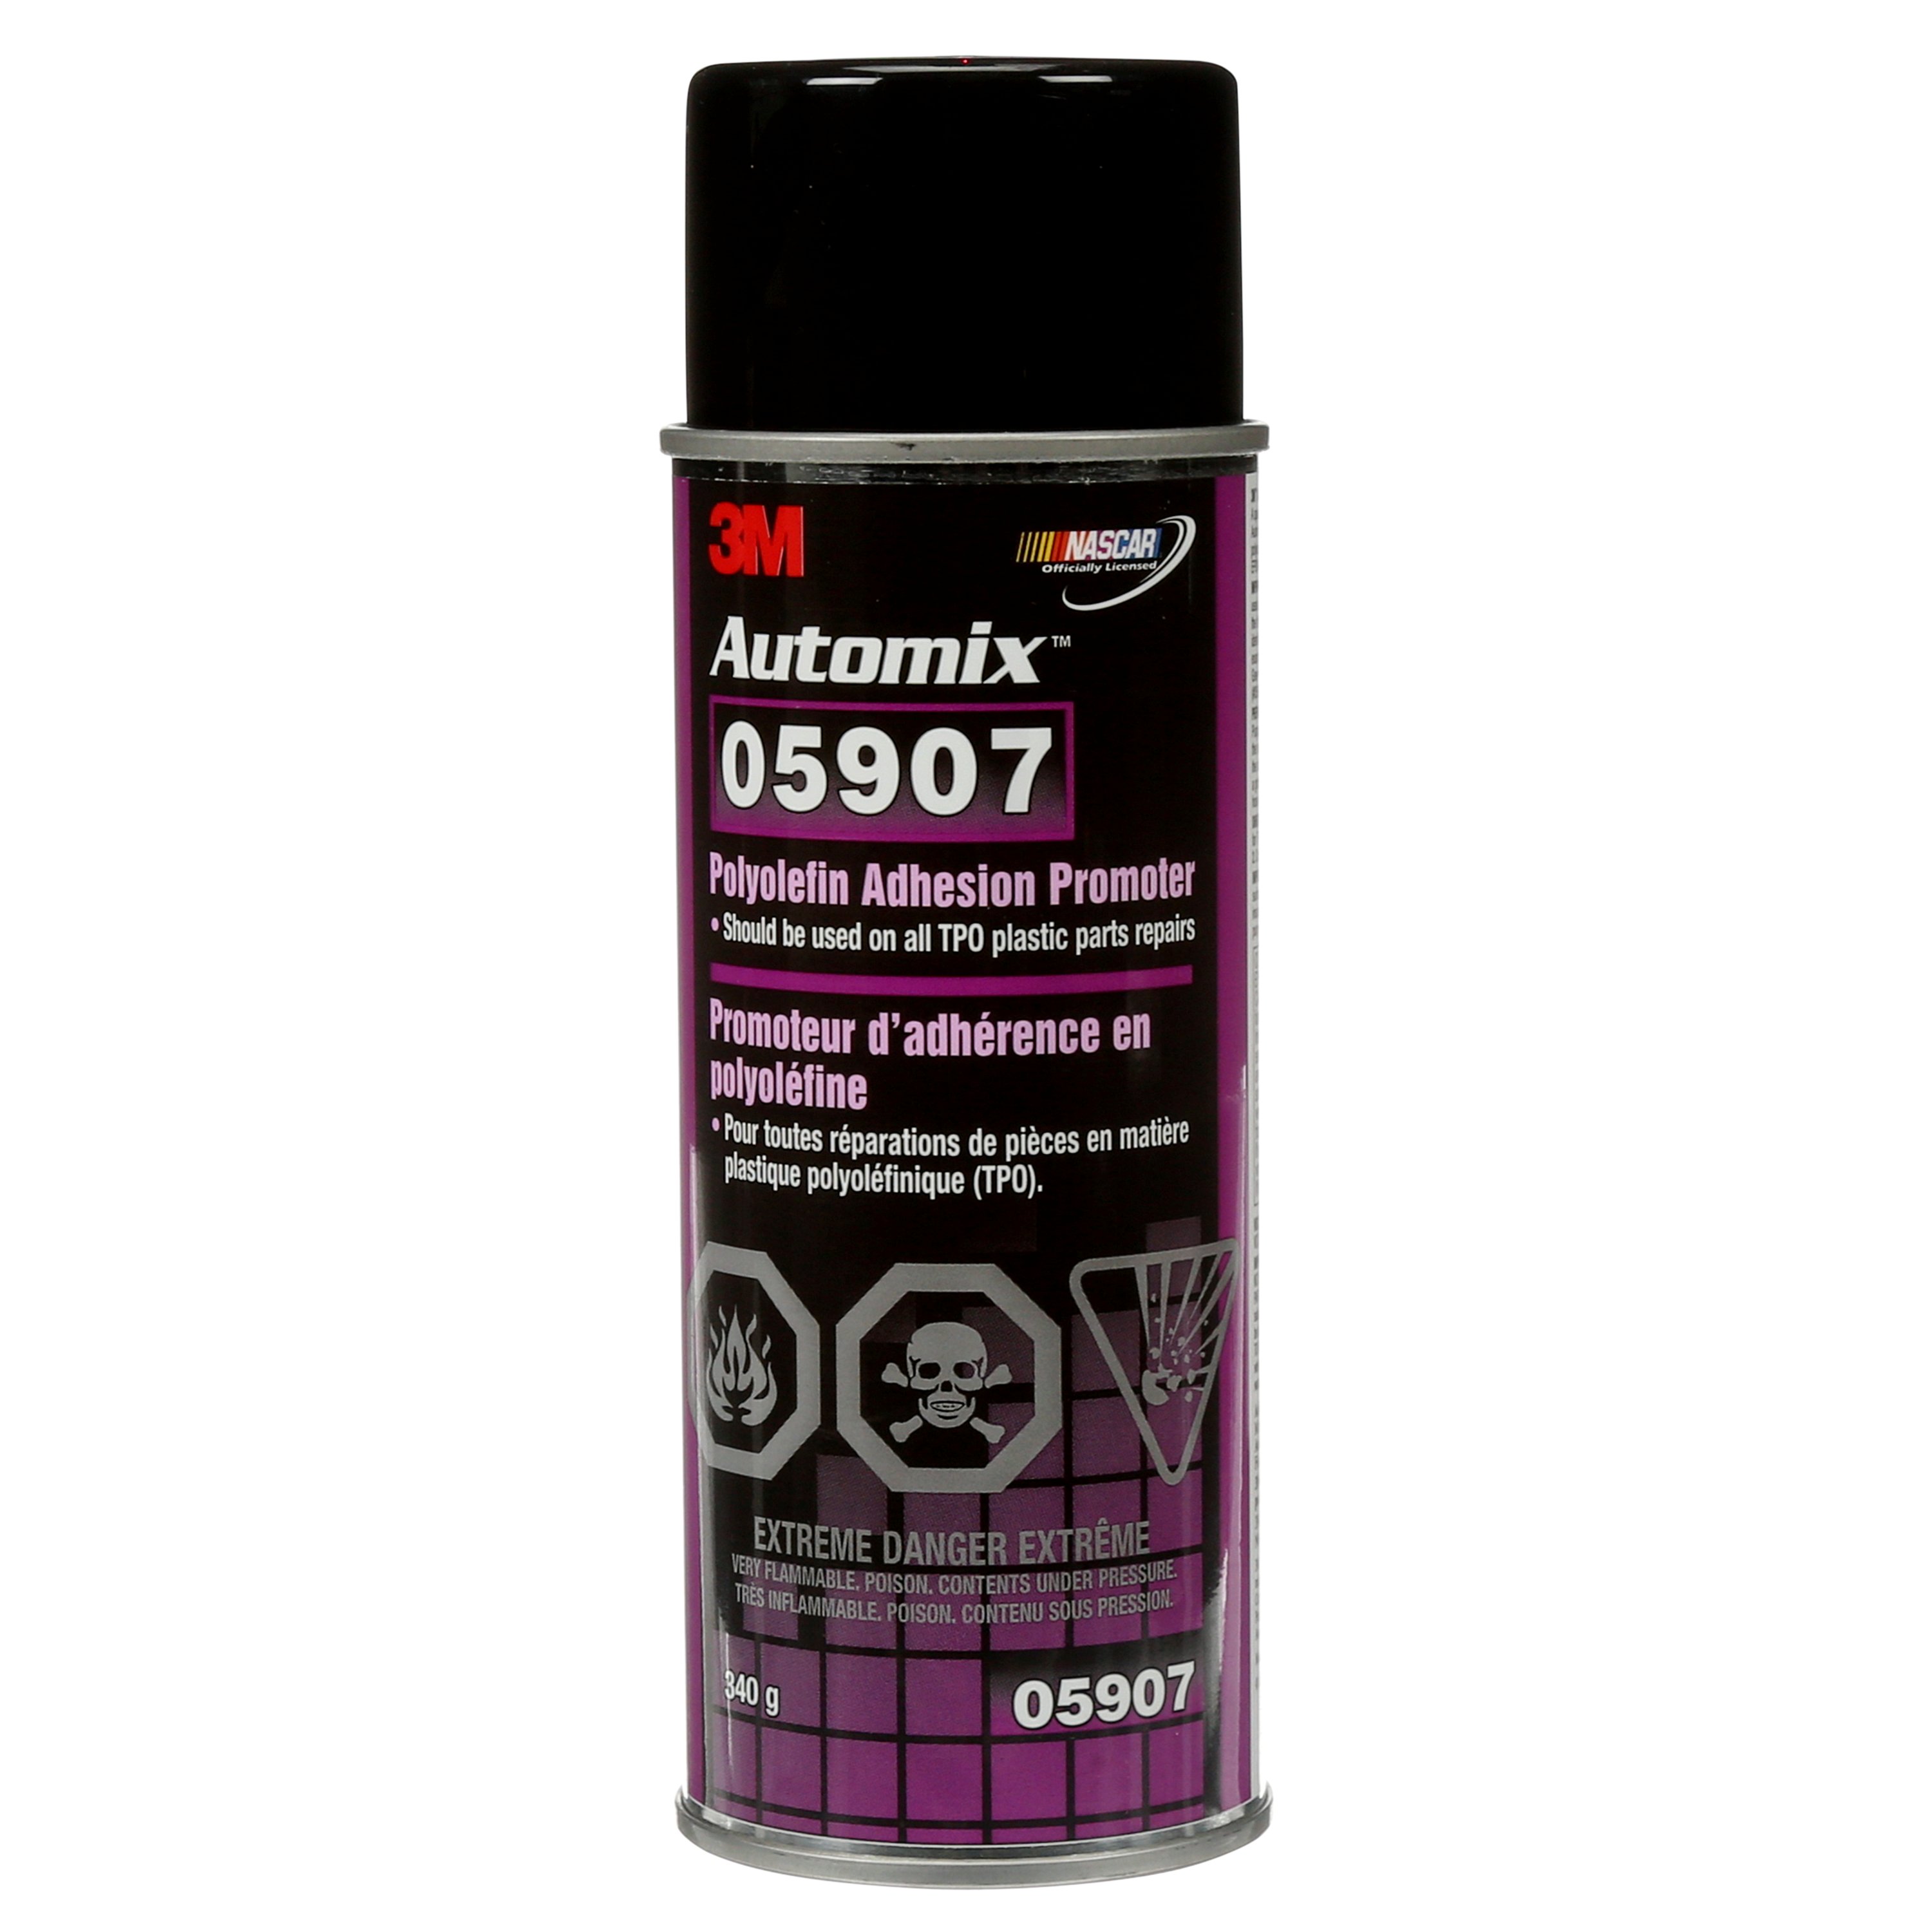 3M™ Polyolefin Adhesion Promoter ensures strong adhesion when repairing PP, EP, TPO or EPDM substrates.